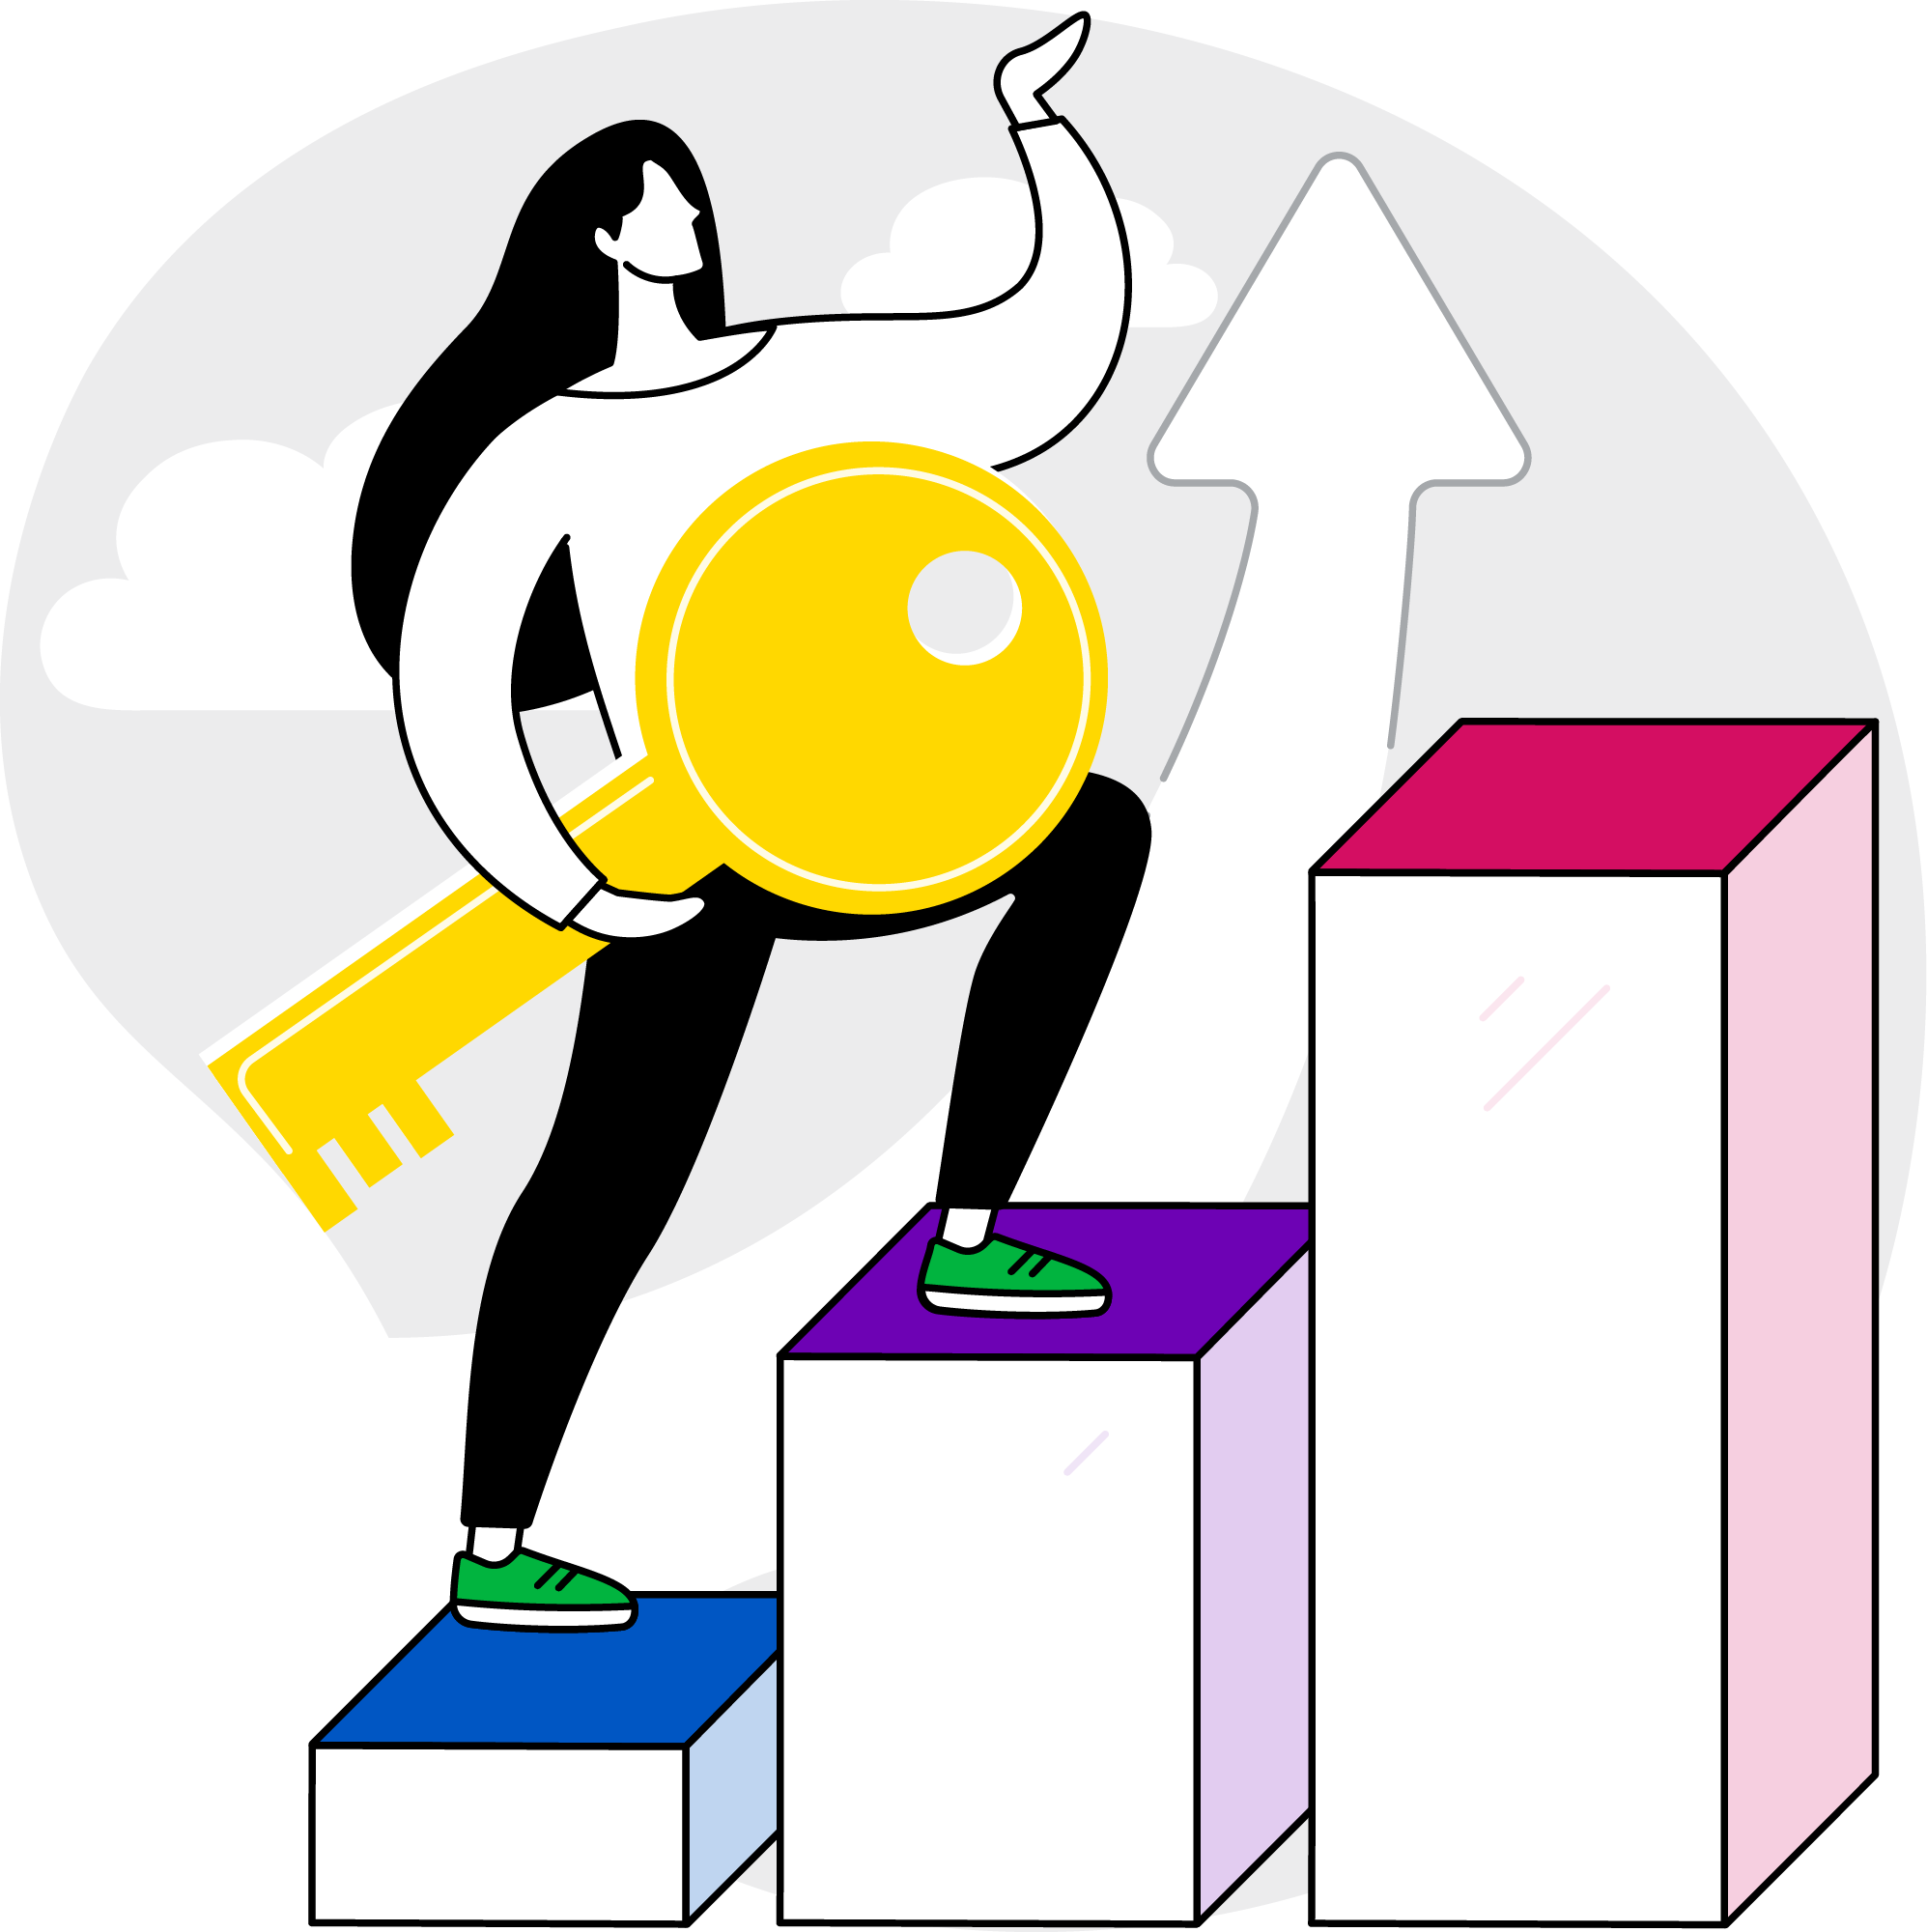 A 2D illustration of a woman holding a large key, climbing up stairs that look like a growing bar graph.